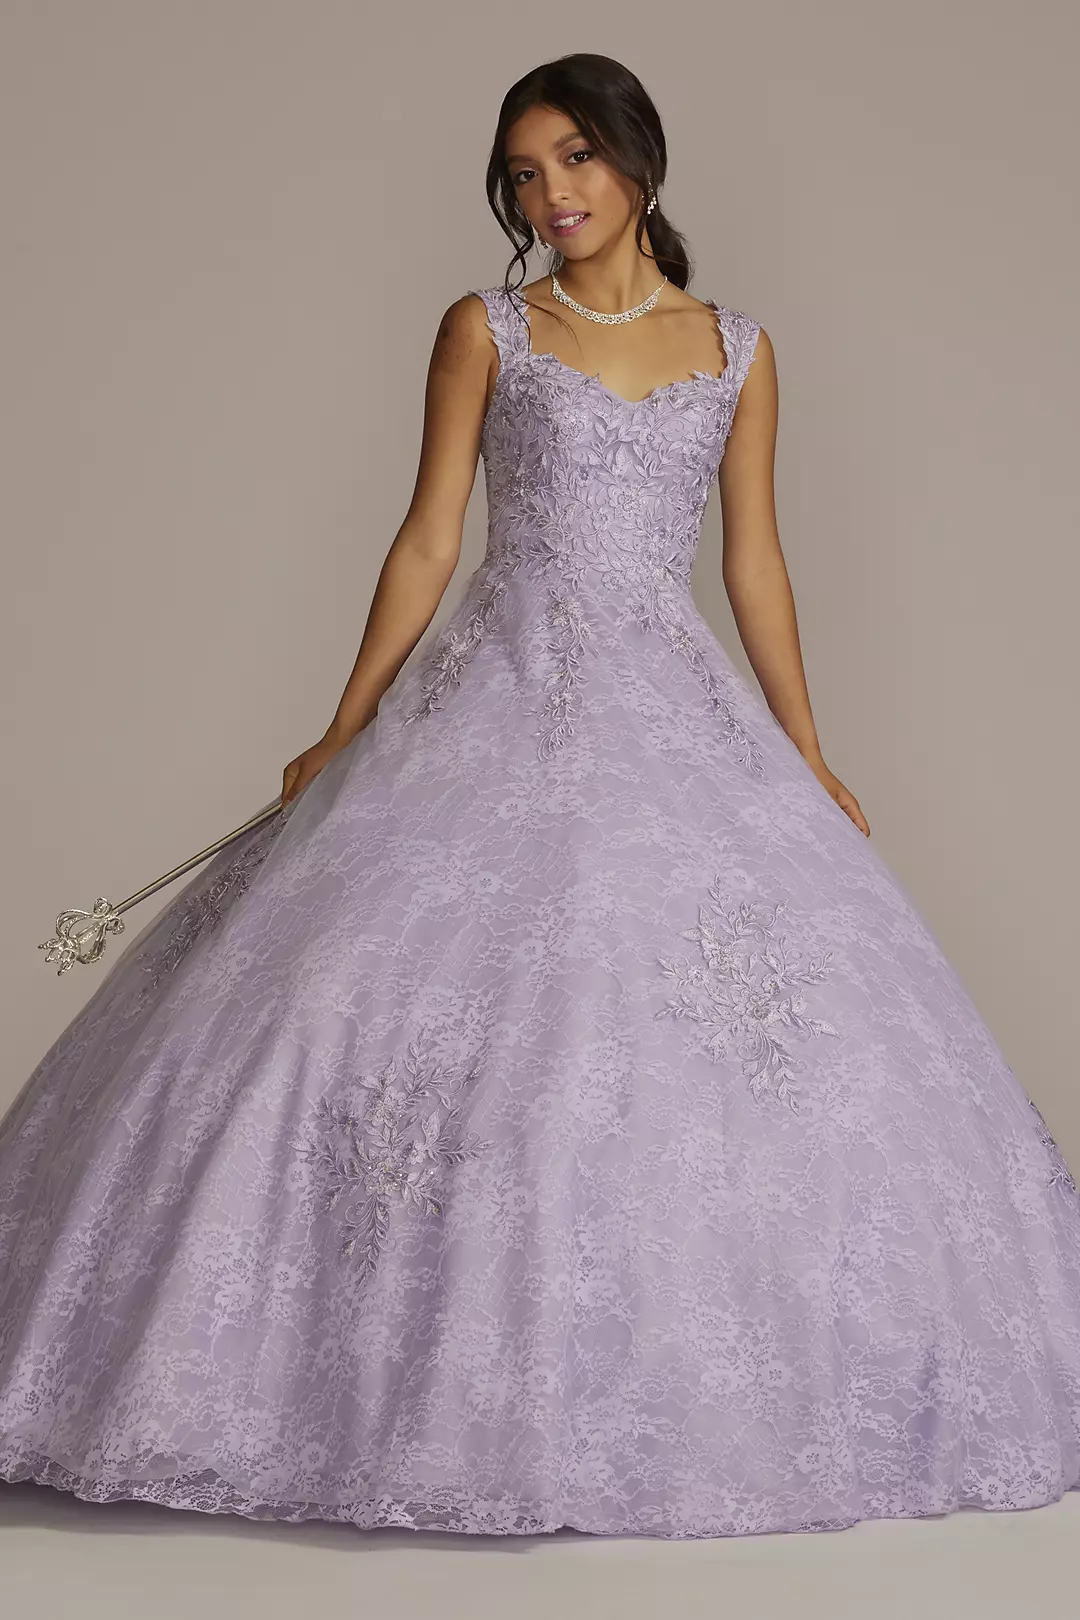 Lace Applique Semi-Cap Sleeve Quince Ball Gown Image